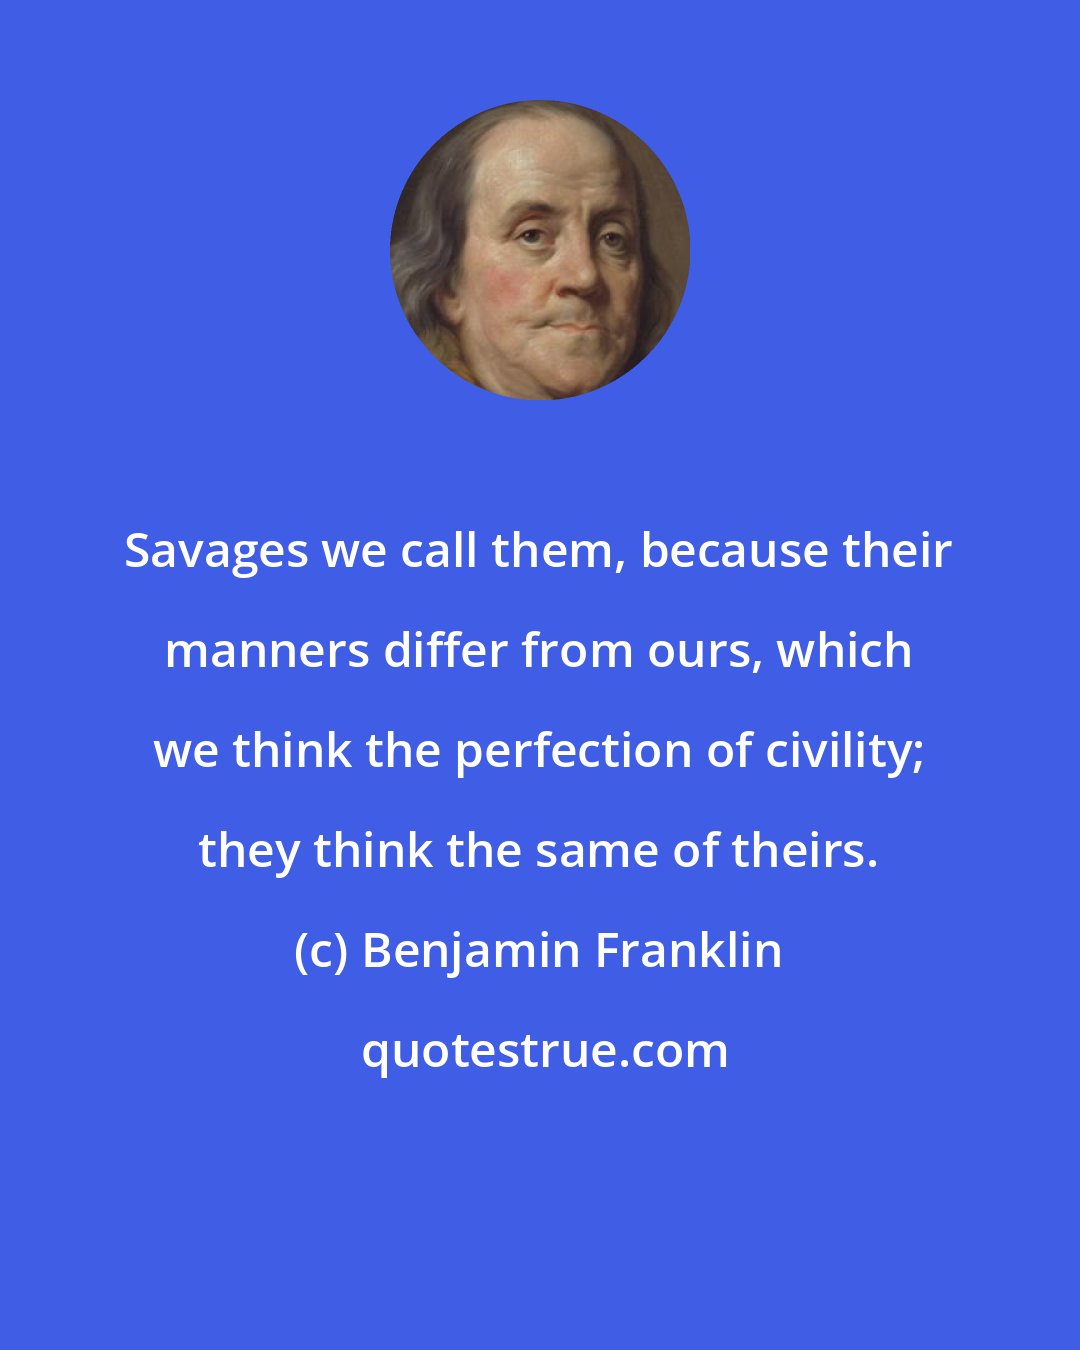 Benjamin Franklin: Savages we call them, because their manners differ from ours, which we think the perfection of civility; they think the same of theirs.